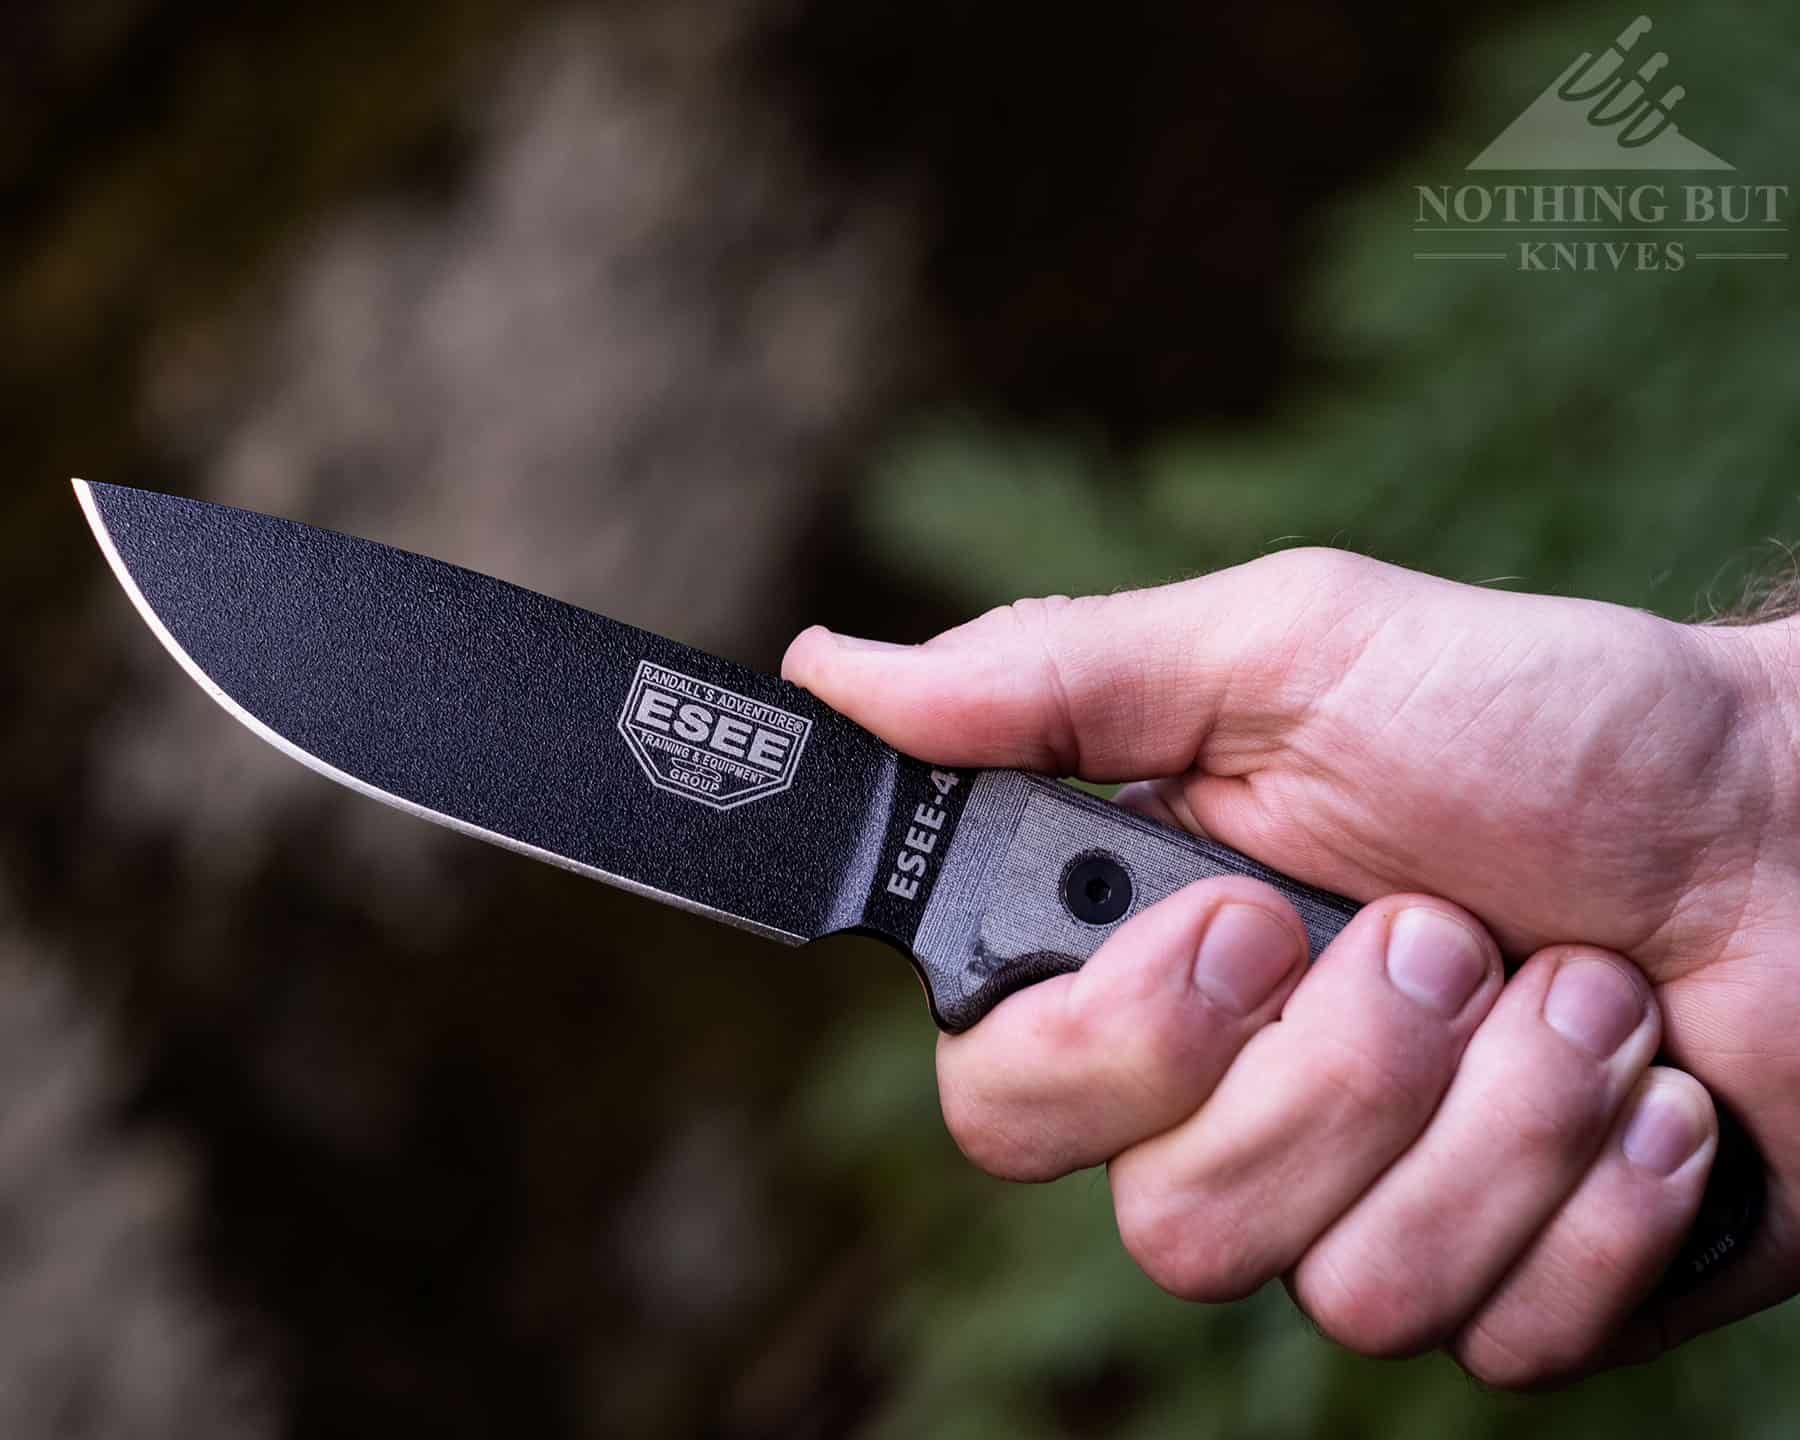 The ergonomic easy to grip Micarta handles of the Esee 4, make it a great choice for a tactical knife.